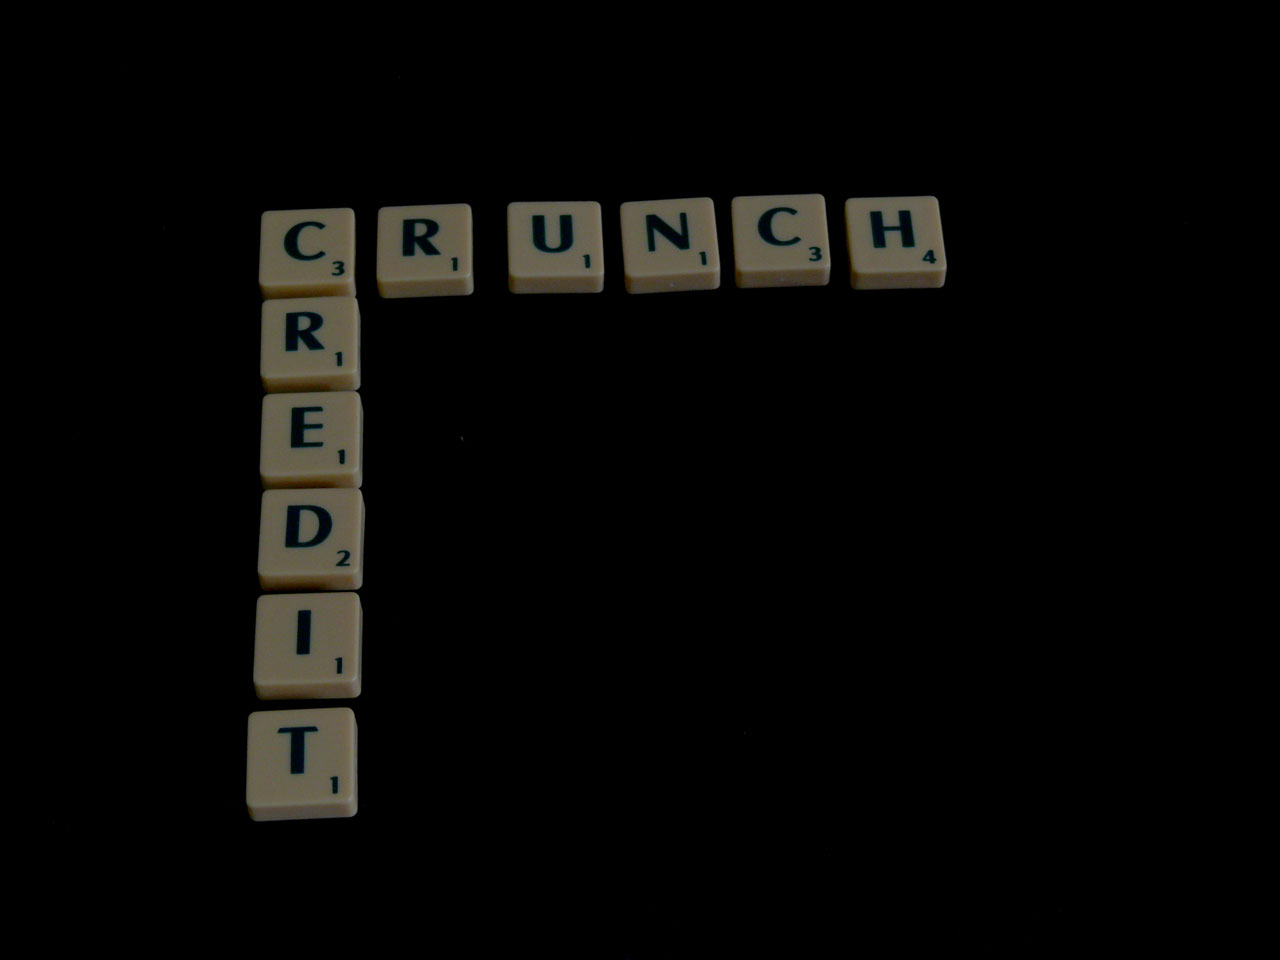 credit crunch business free photo